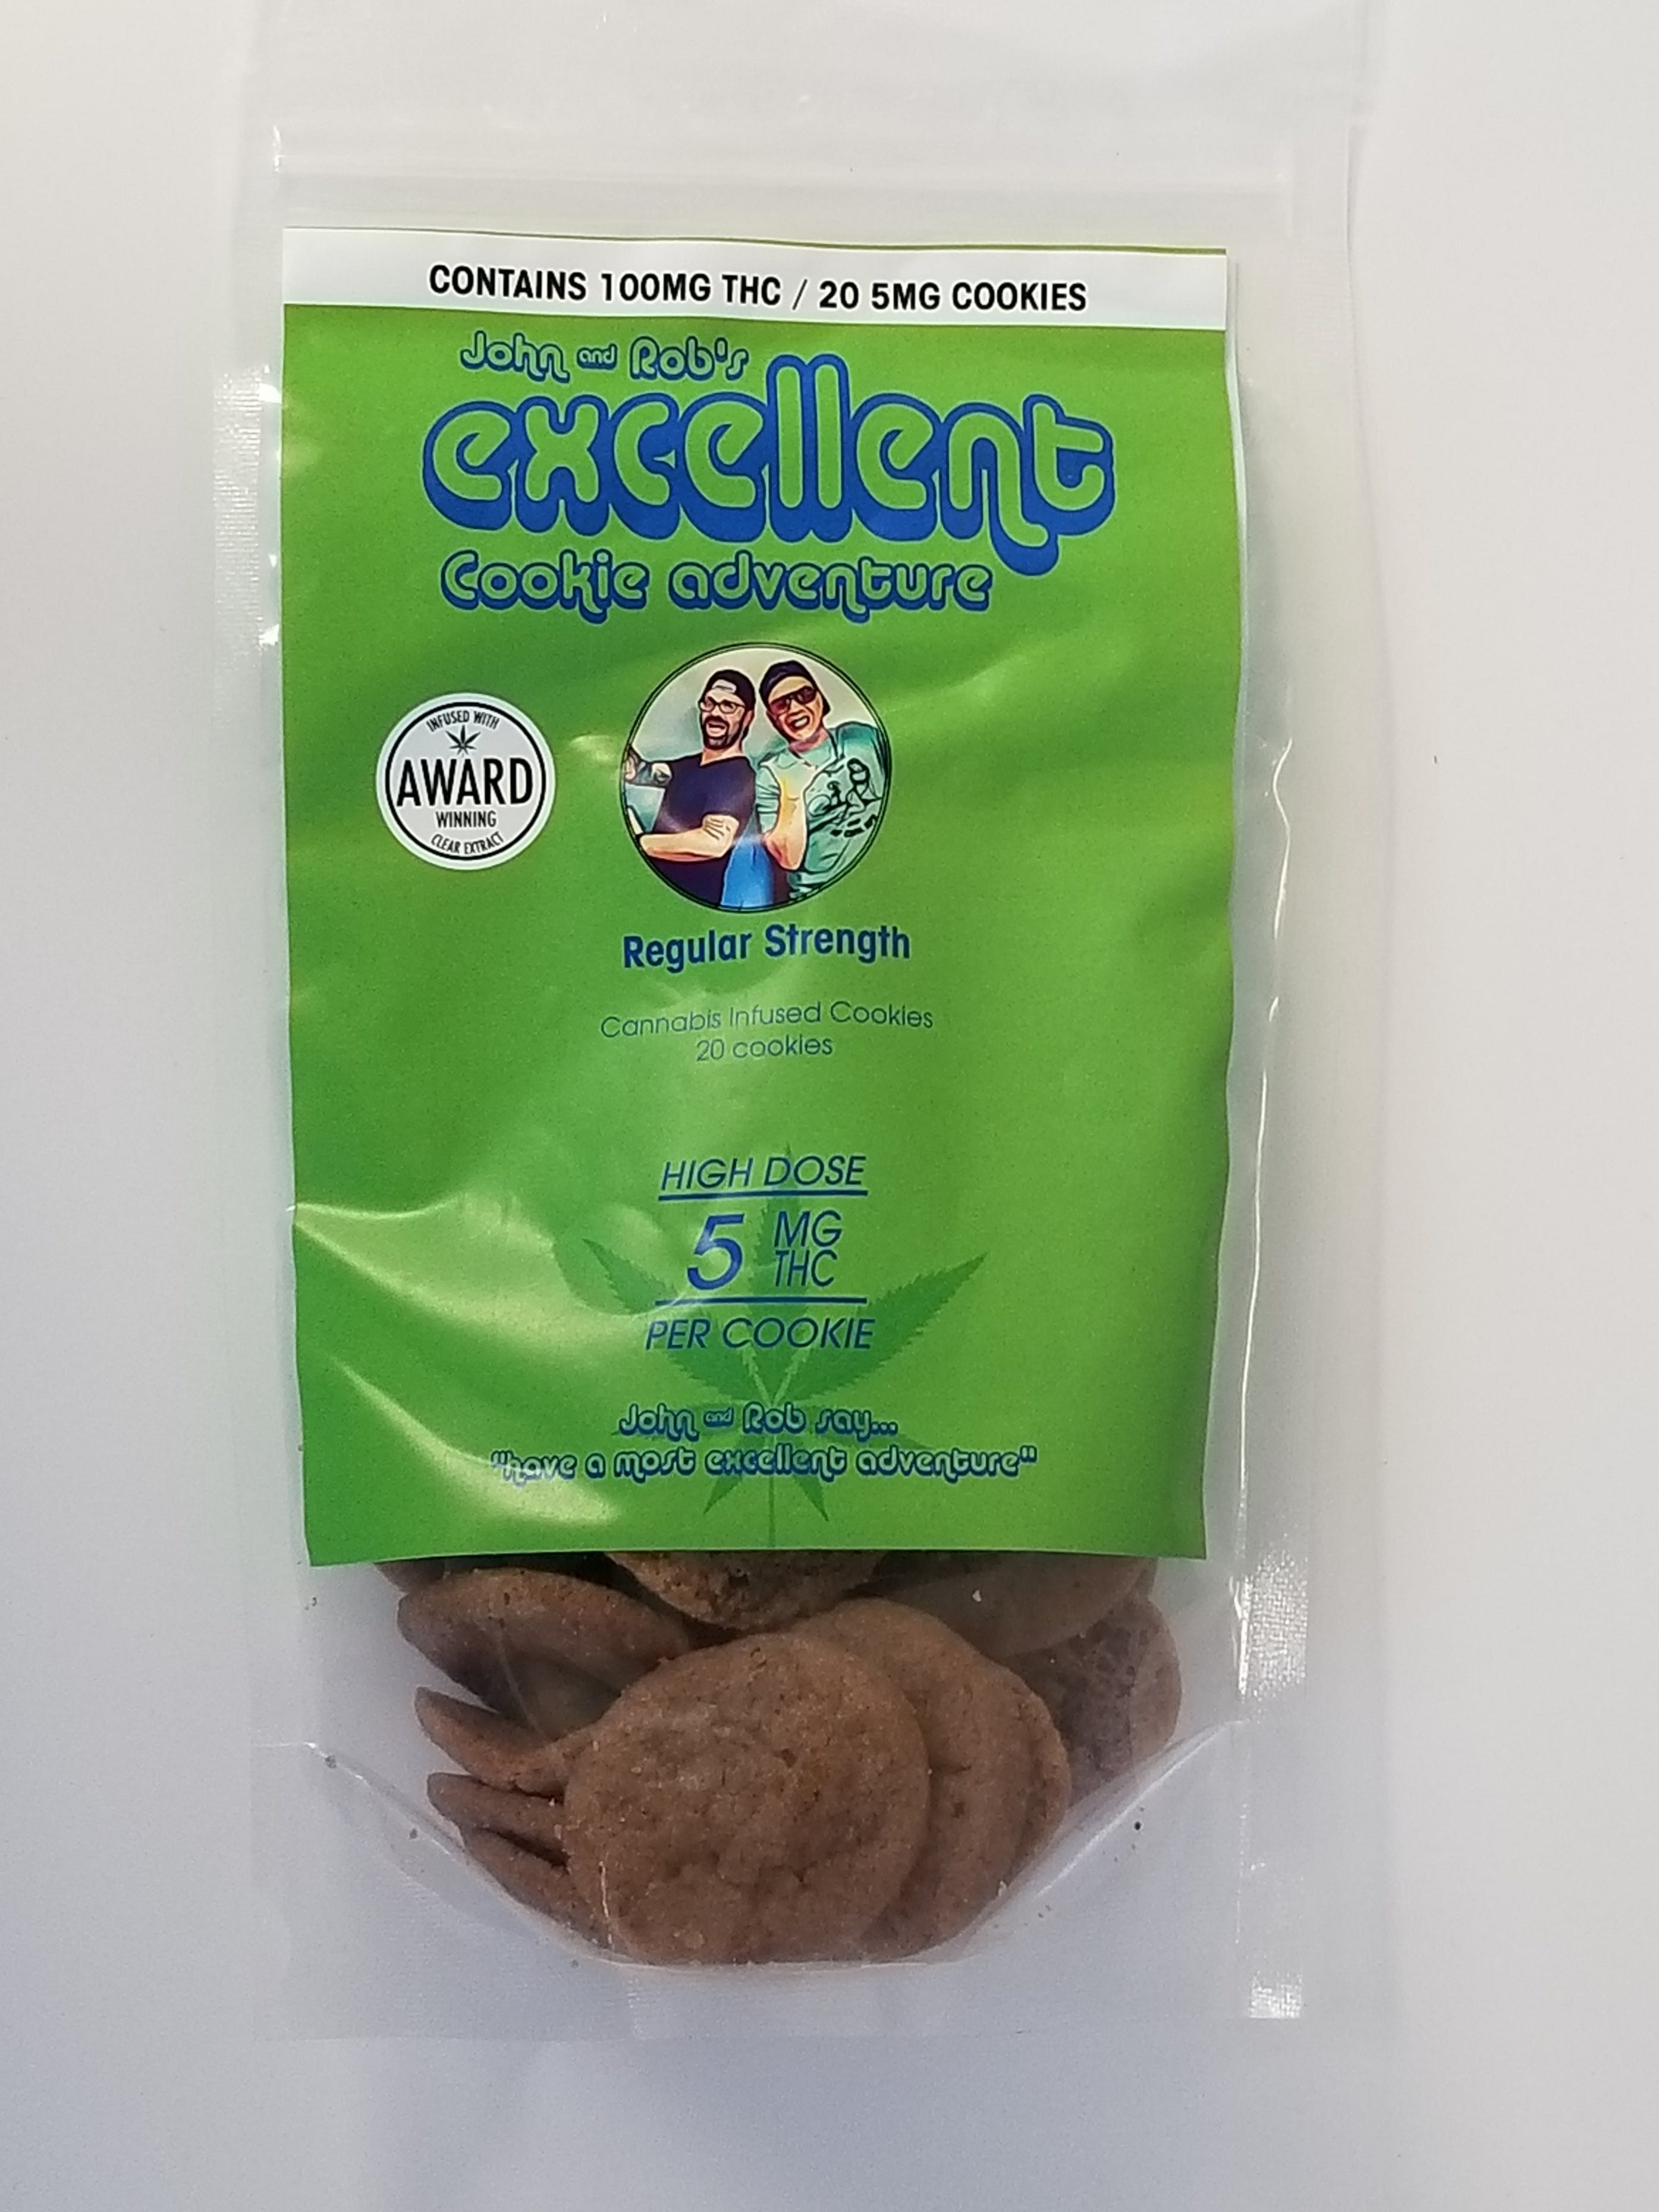 edible-john-and-robs-excellent-cookie-adventure-100mg-regular-strength